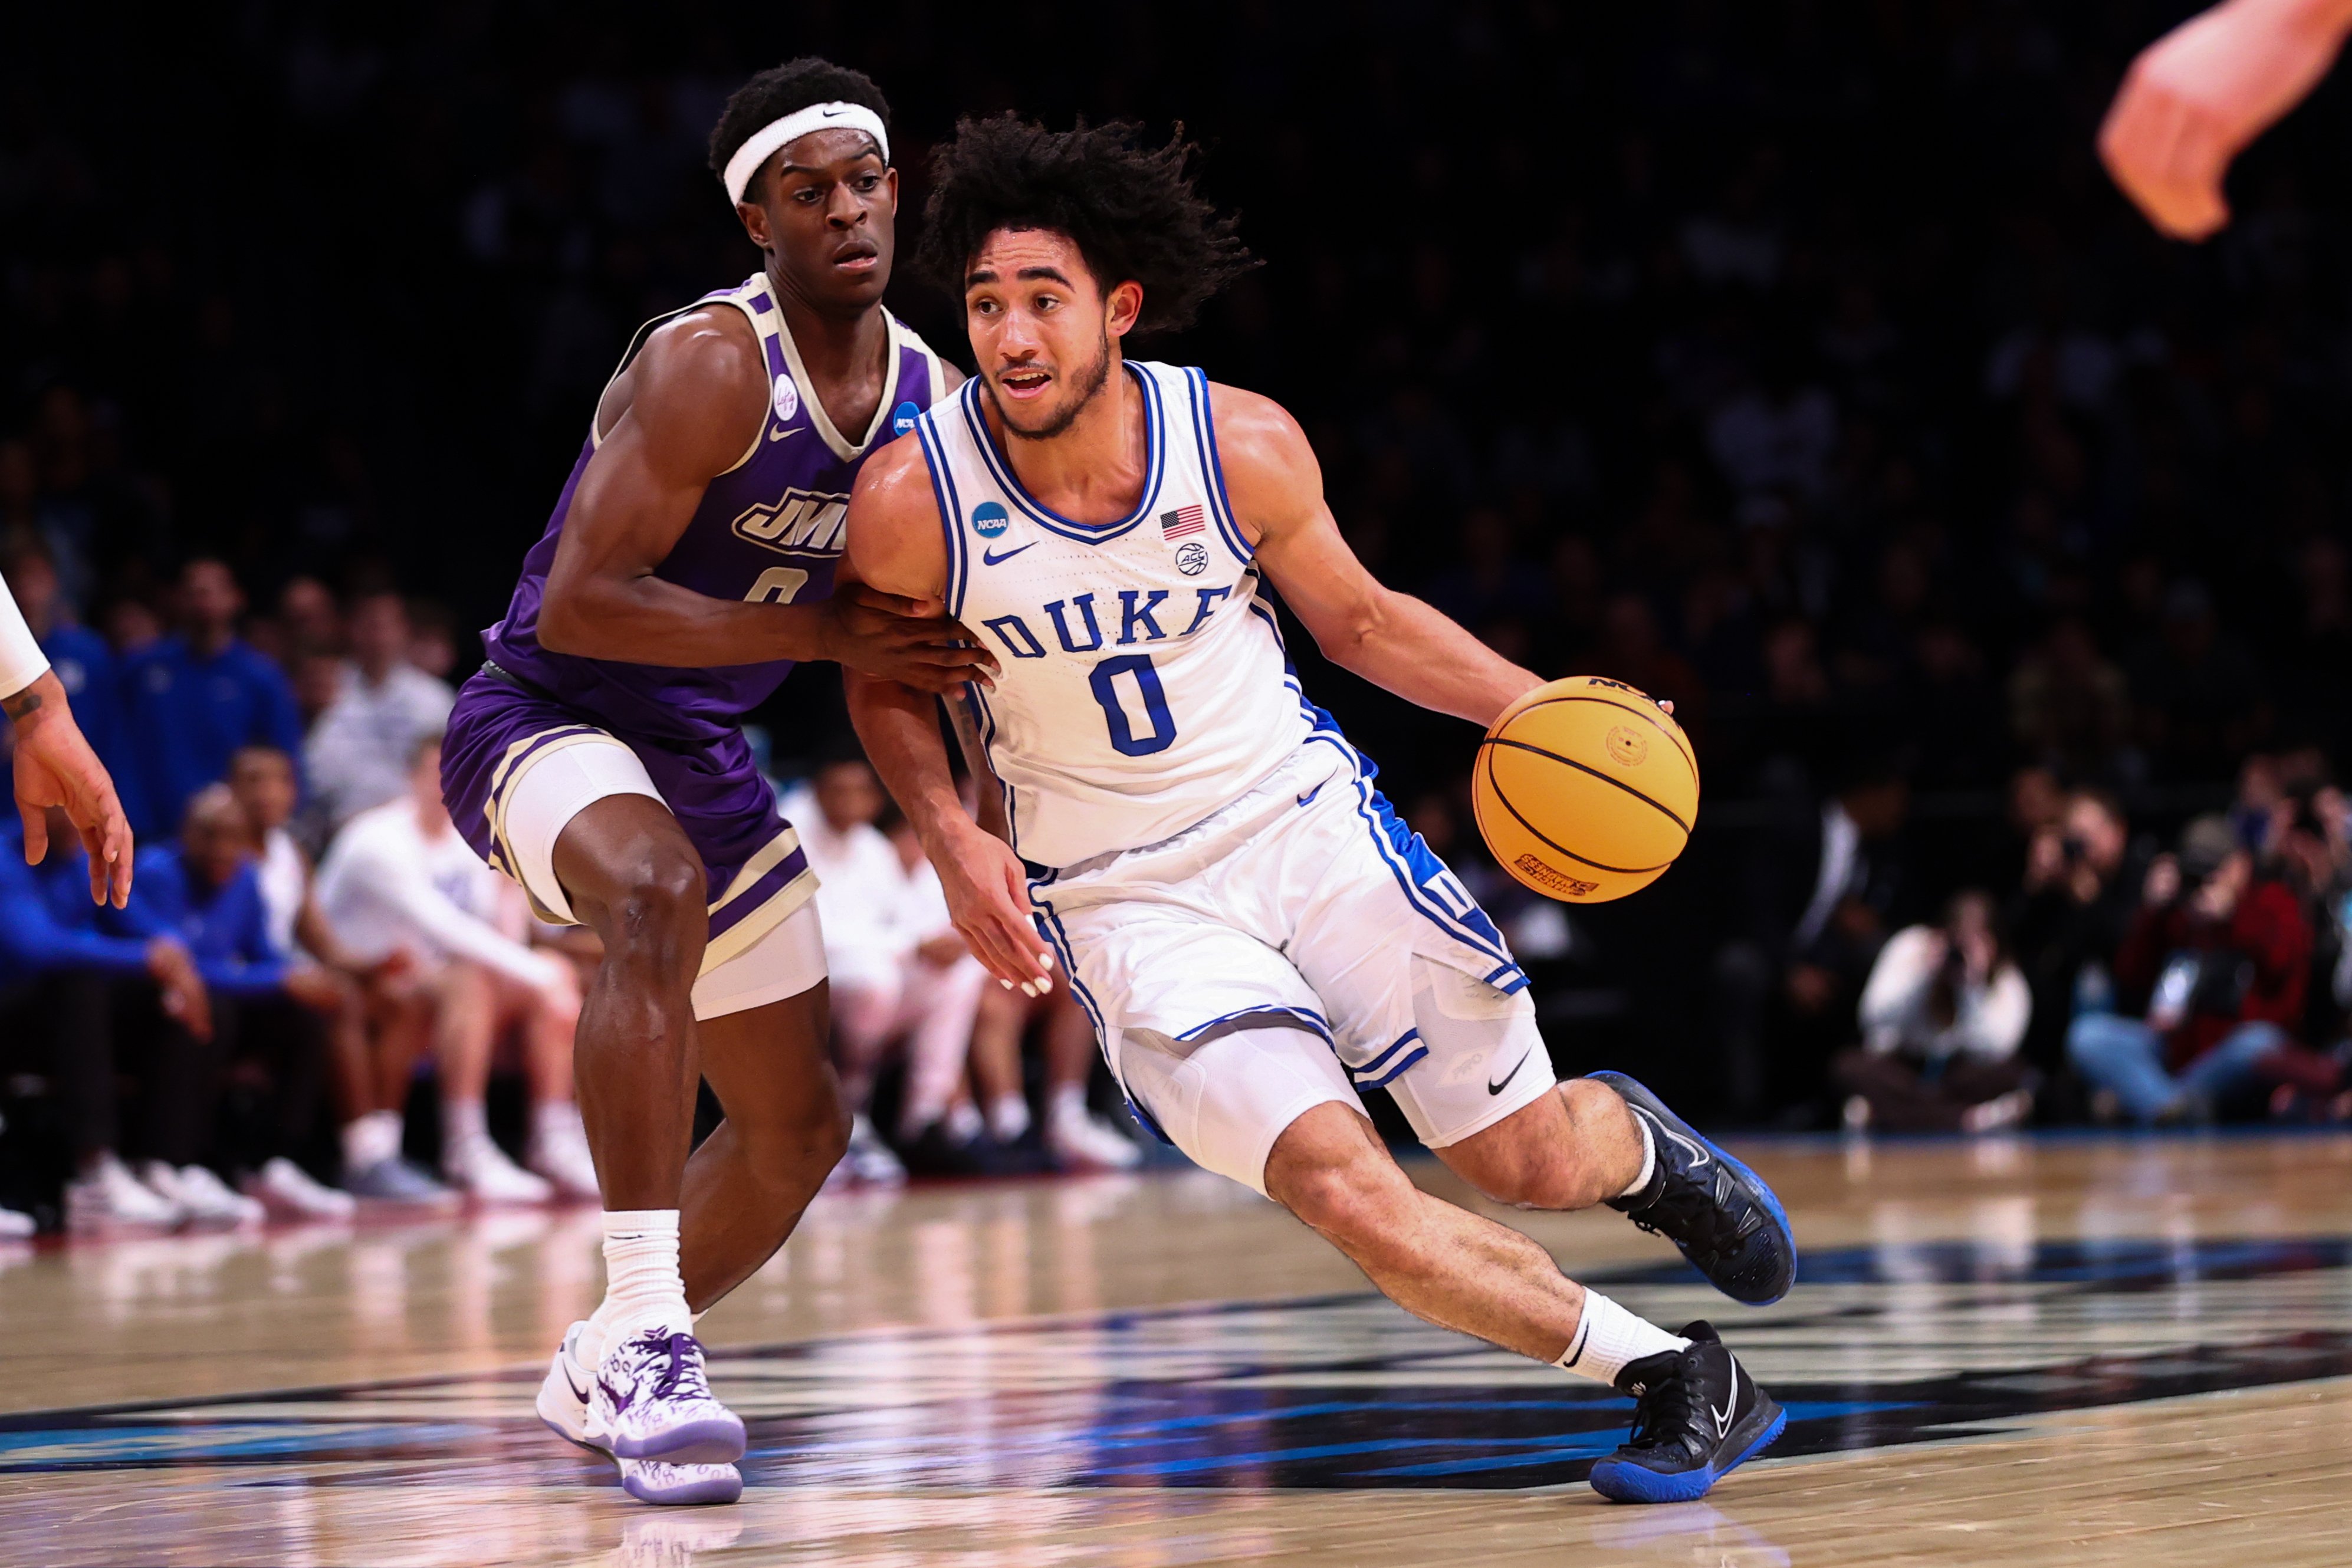 Jared McCain #0 of the Duke Blue Devils is defended by Xavier Brown #0 of the James Madison Dukes during the first half of the game during the second round of the NCAA Men’s Basketball Tournament at Barclays Center on March 24, 2024, in New York City.